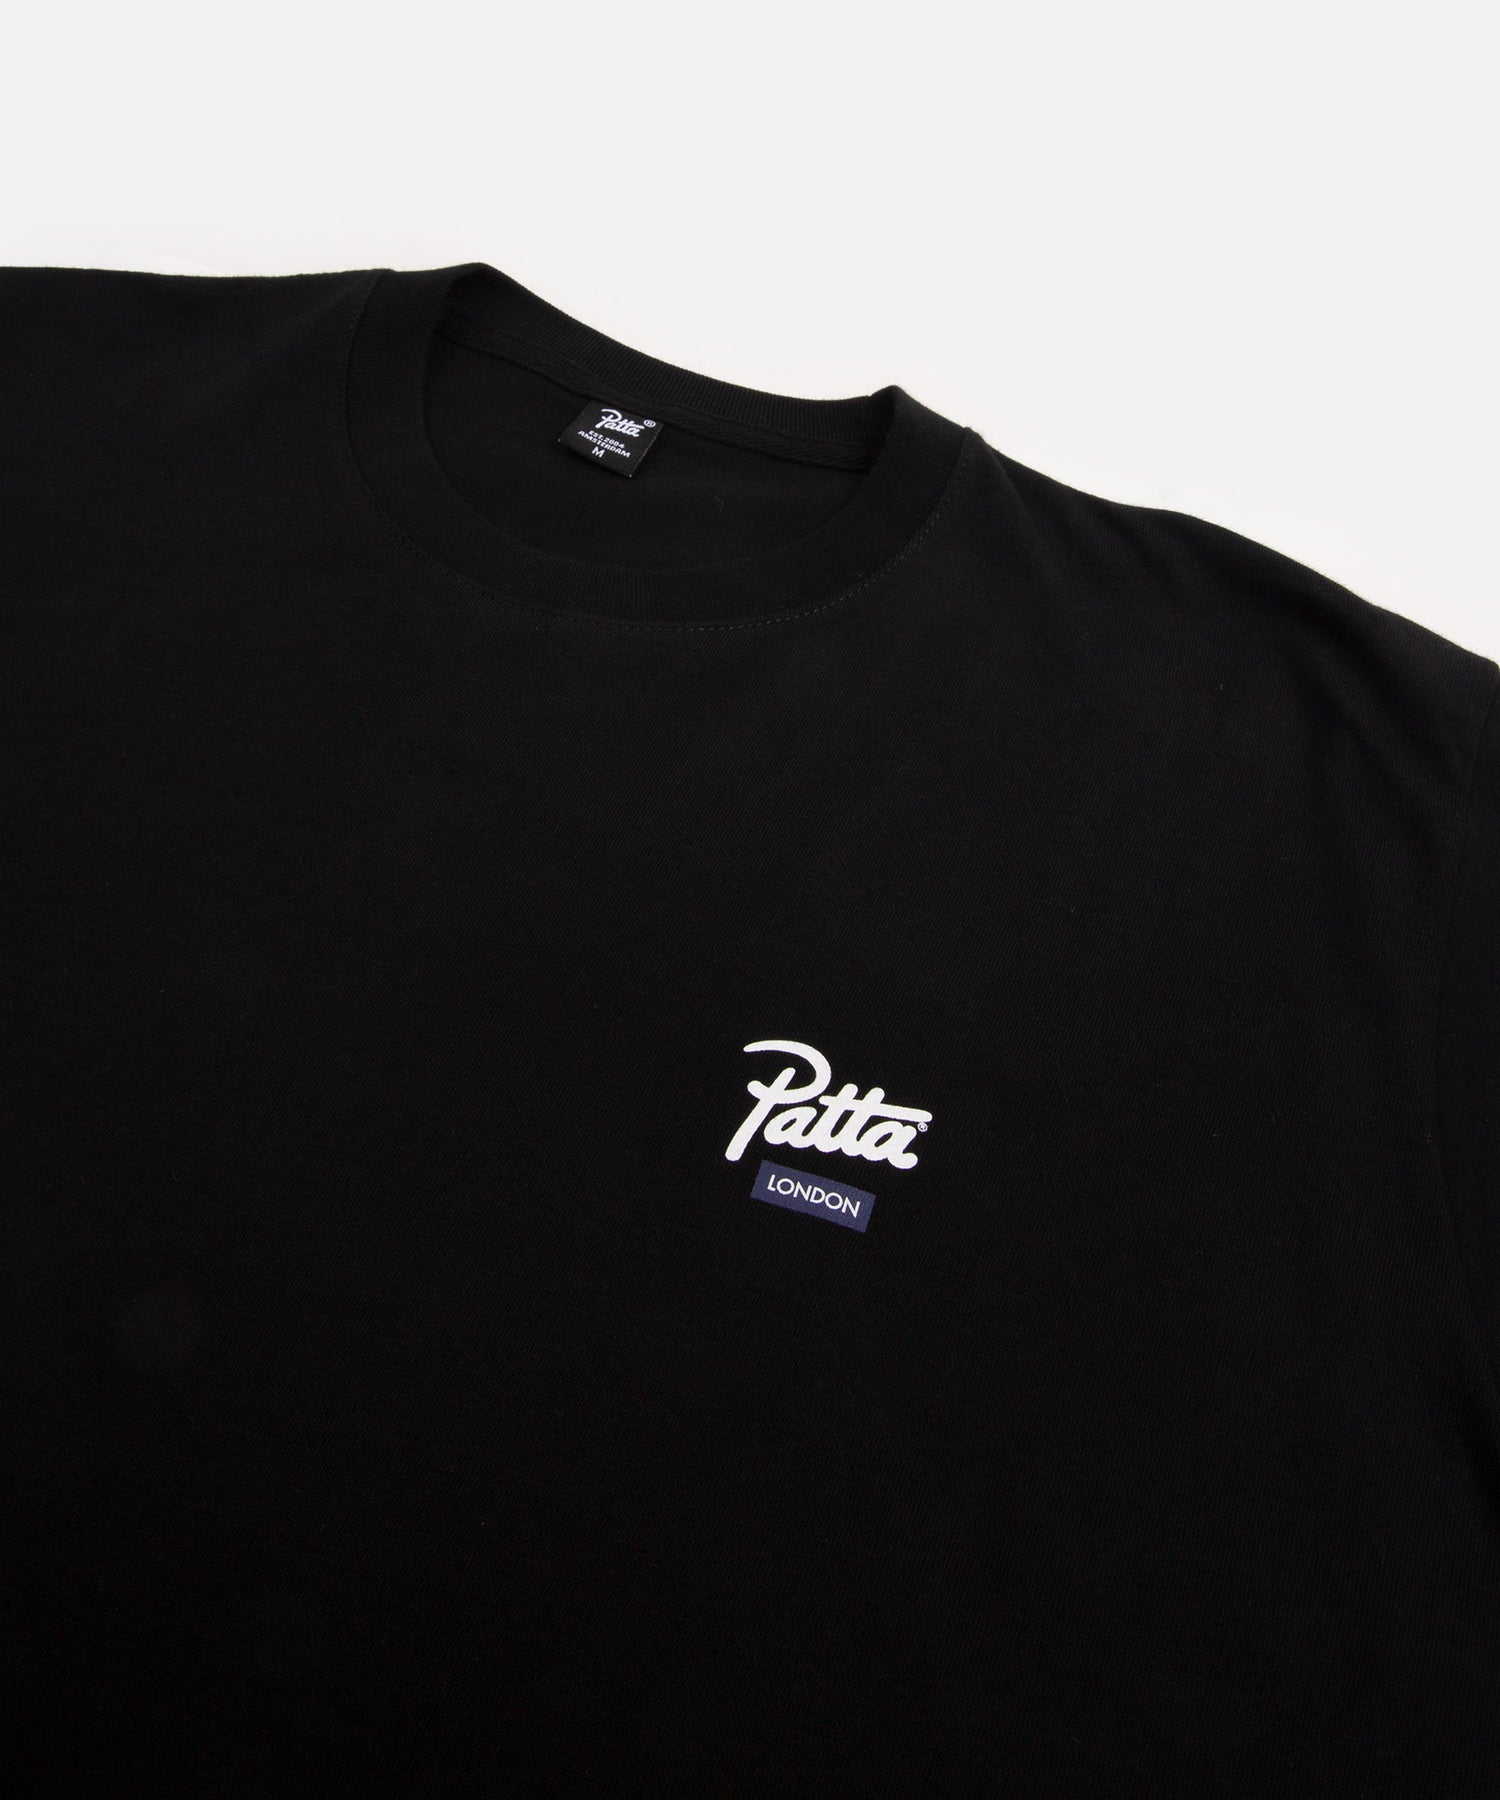 IN-STORE EXCLUSIVE: Patta London Chapter T-Shirt (Black)